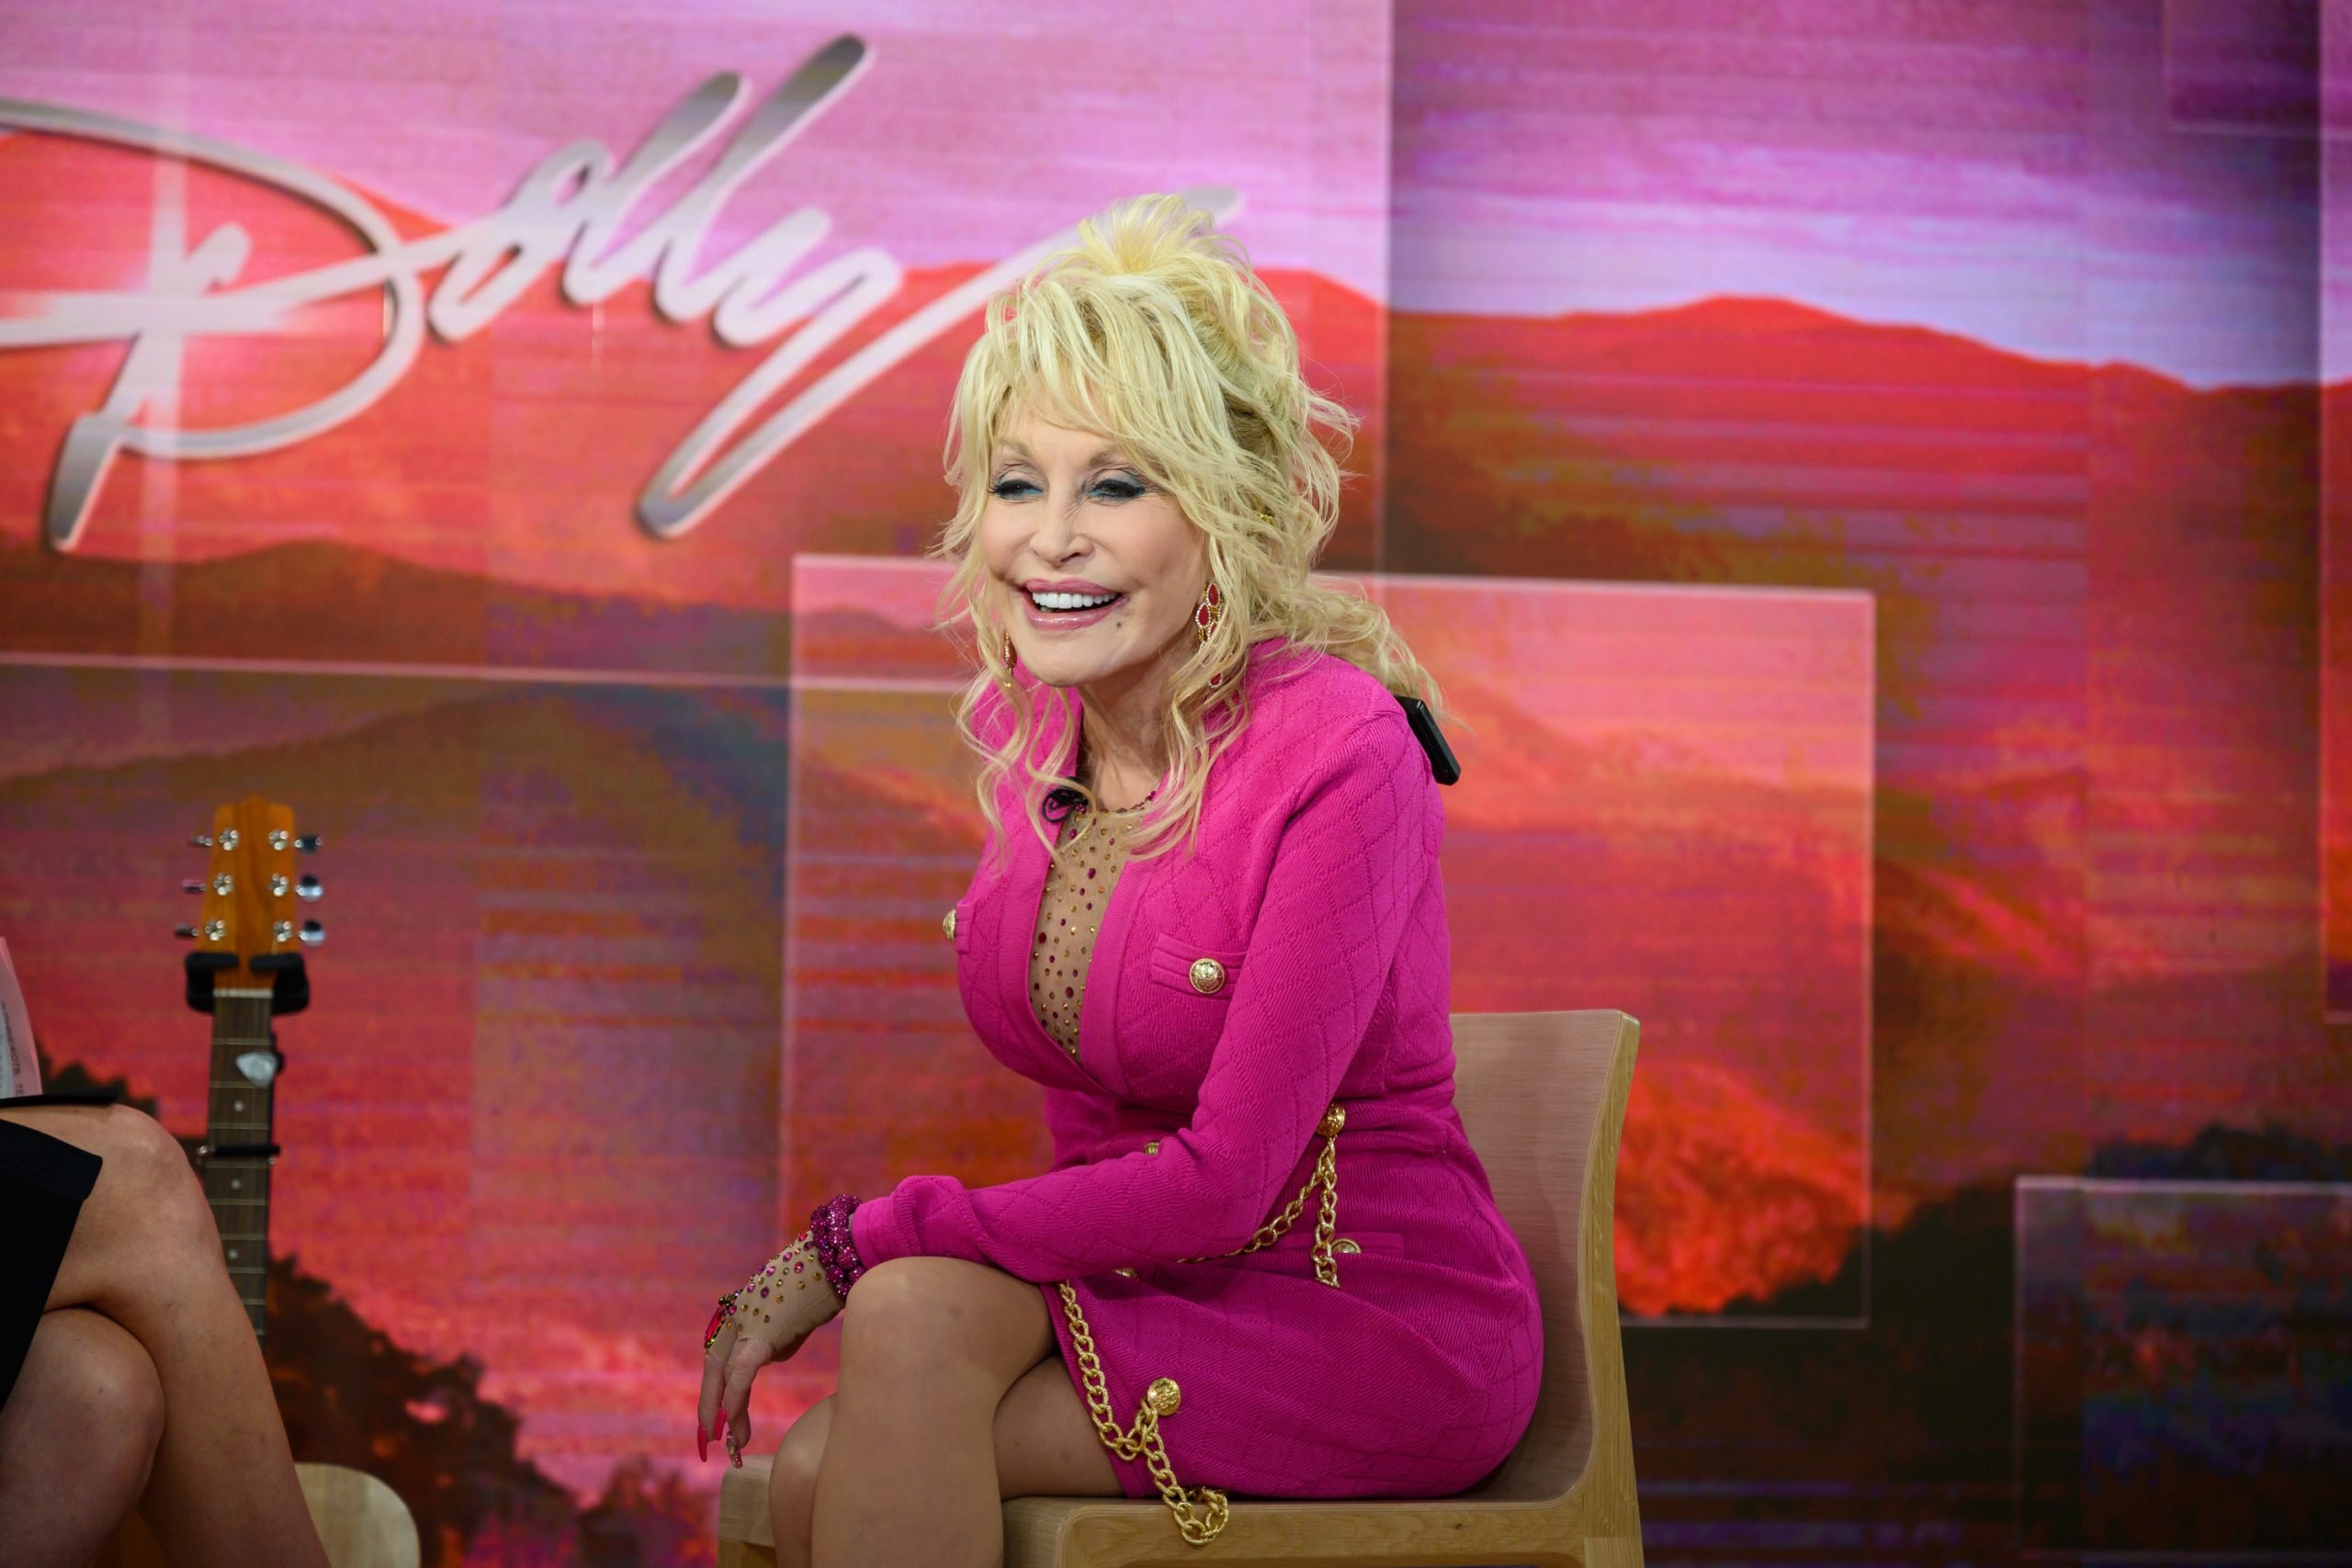 Dolly Parton wearing a bright pink dress on the Today show in 2019 